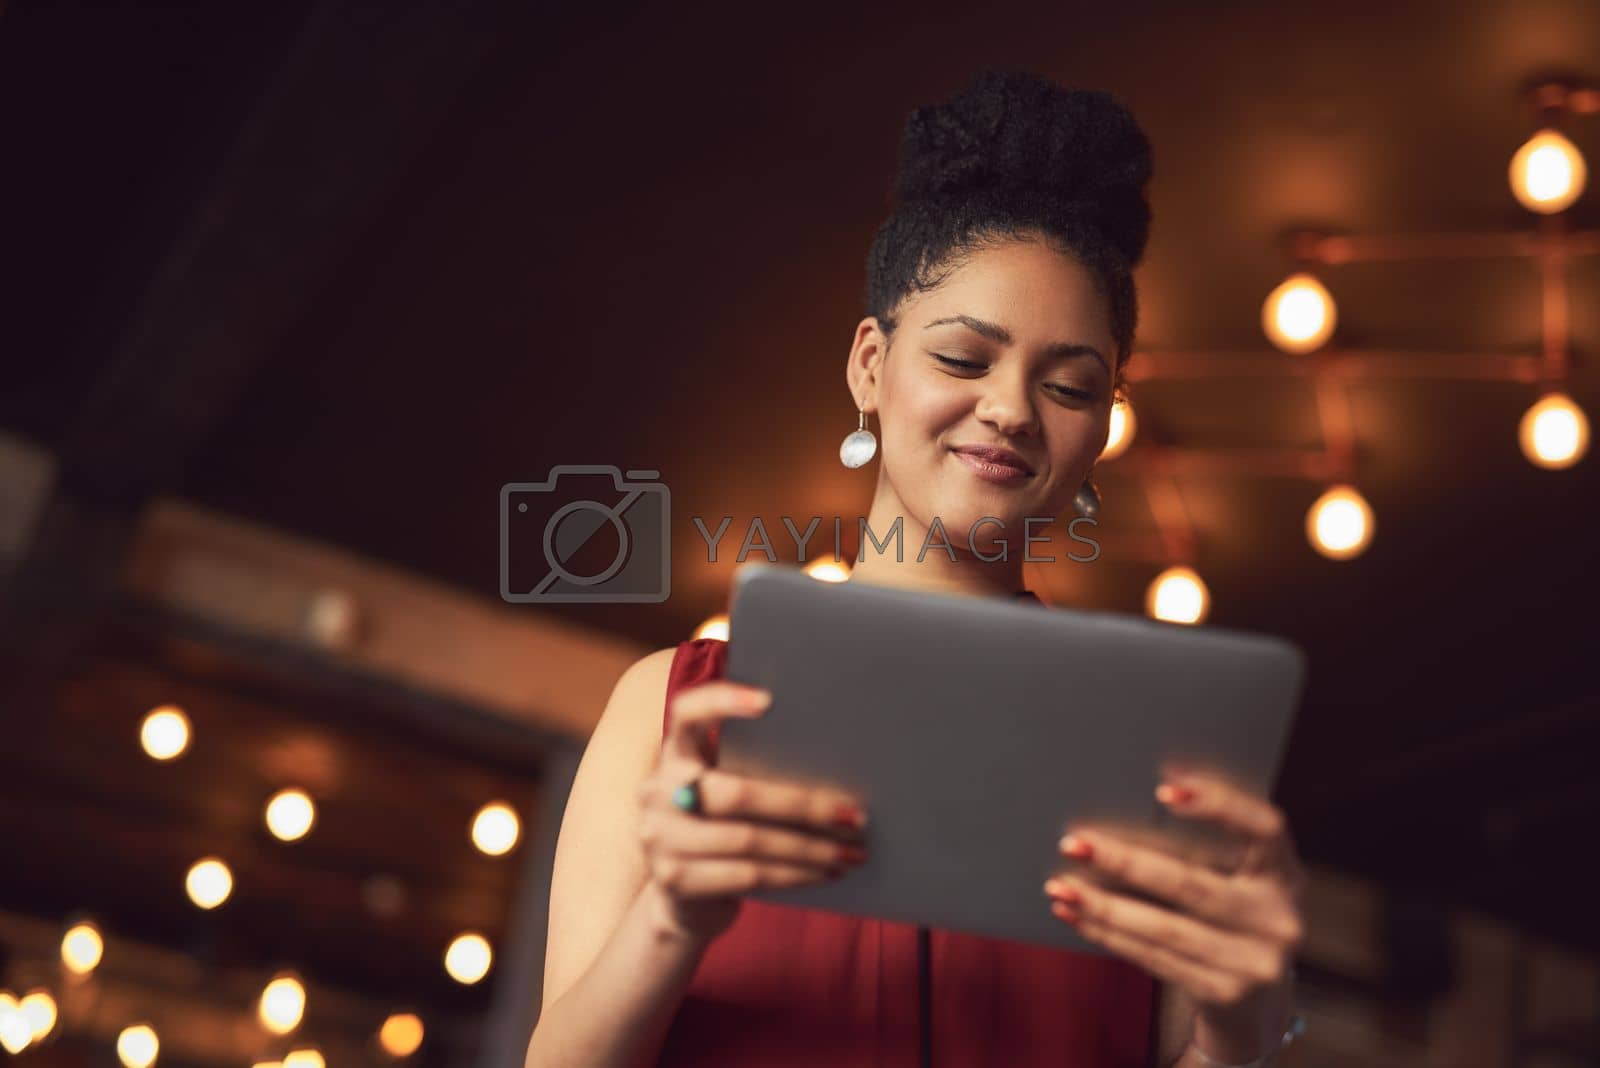 Royalty free image of Browsing at leisure. a young woman using a digital tablet in a cafe. by YuriArcurs